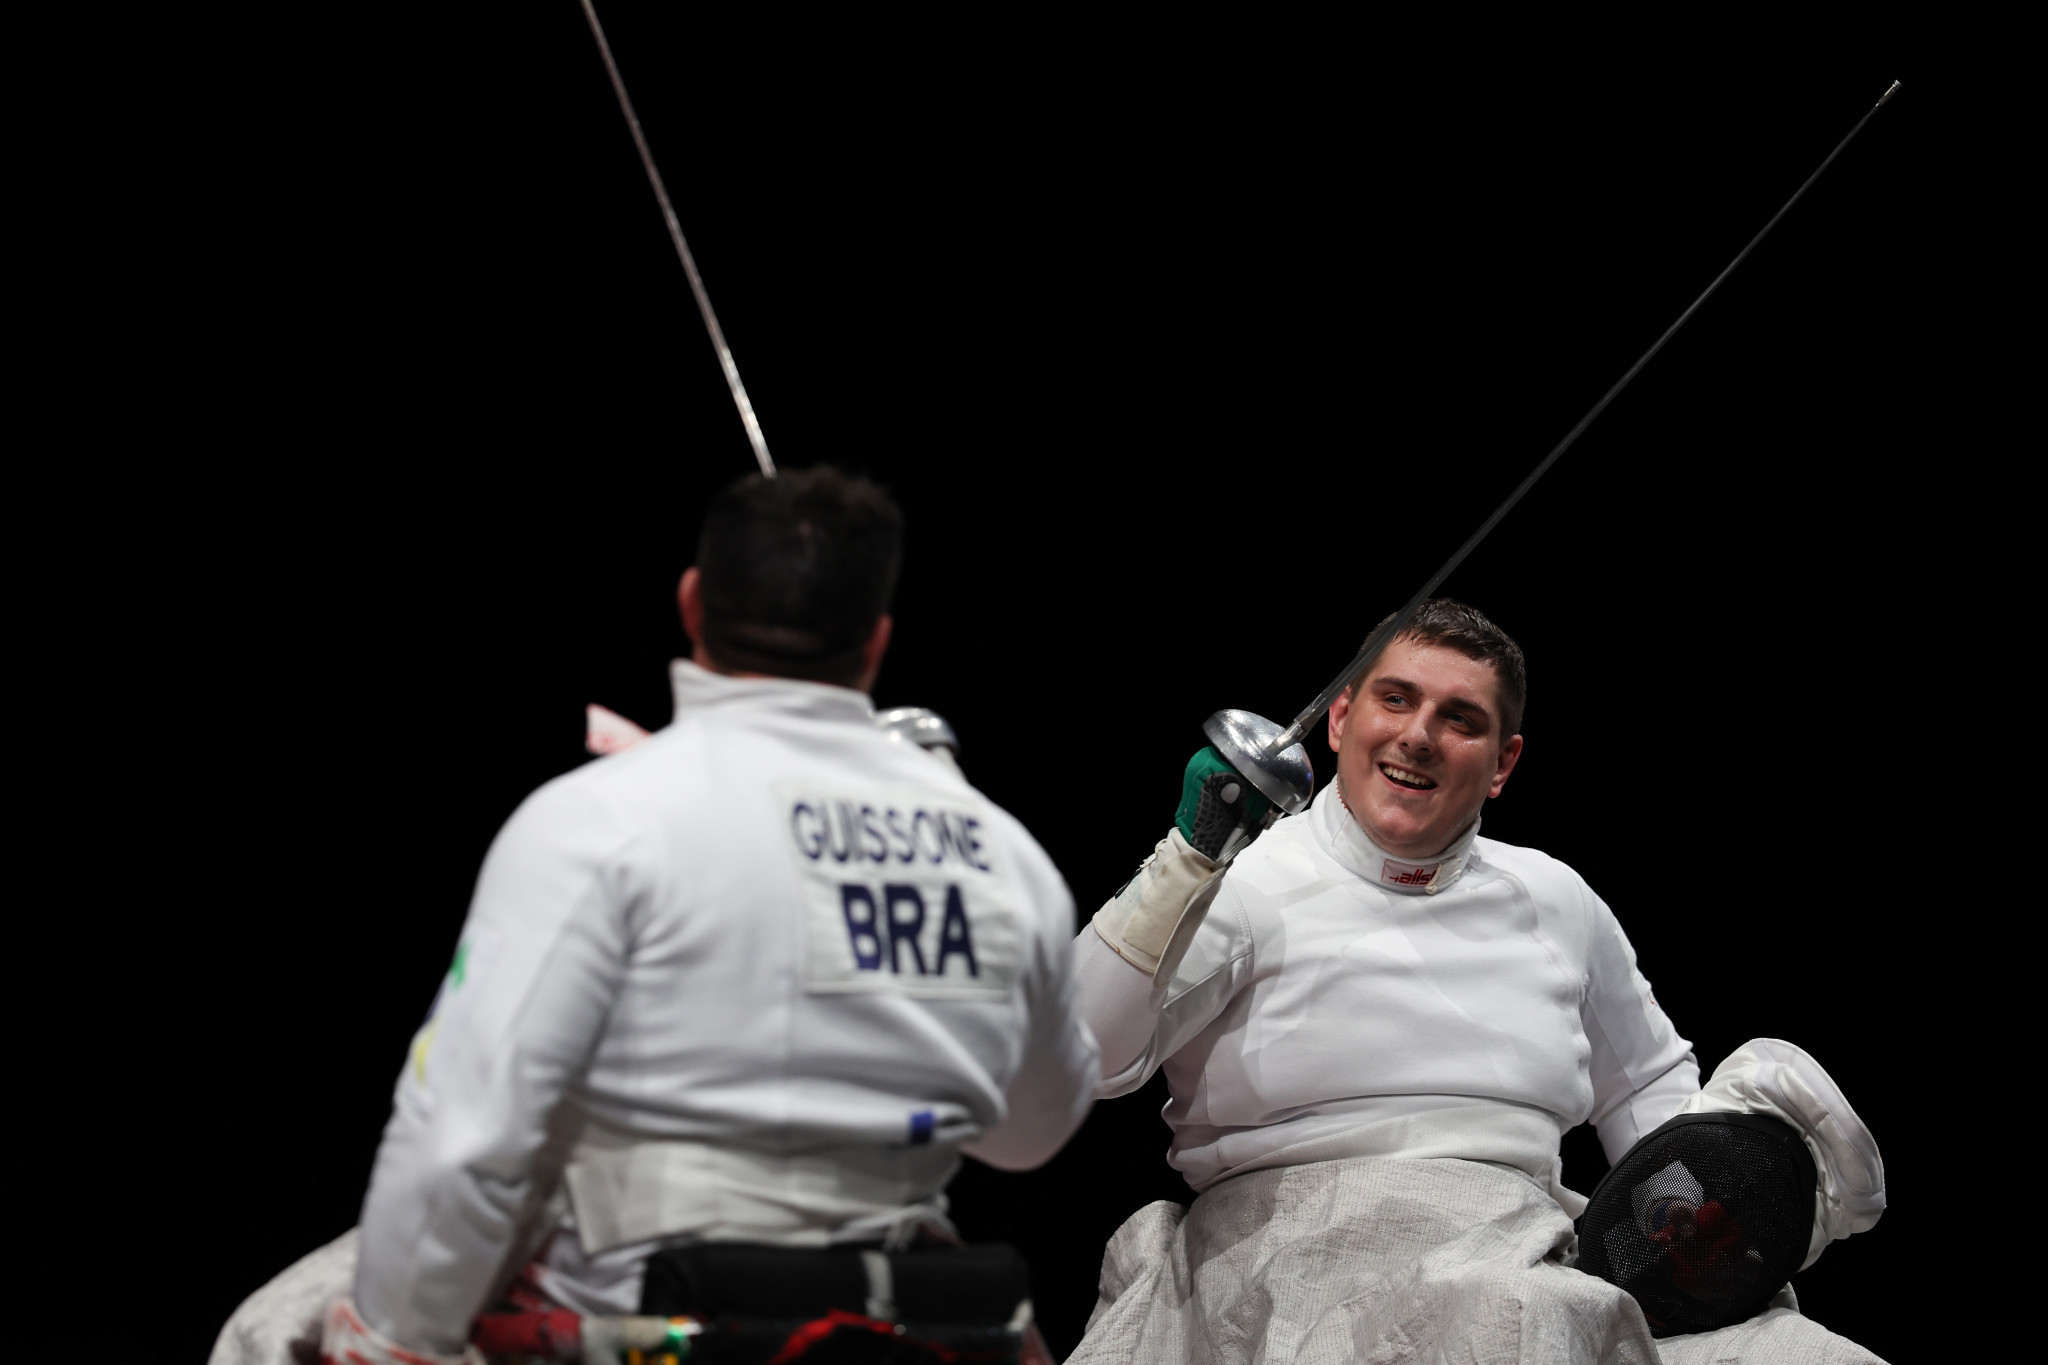 Jovane Guissone, left, could not lead Brazil to another gold medal as the team lost to Italy in the open foil final ©Getty Images